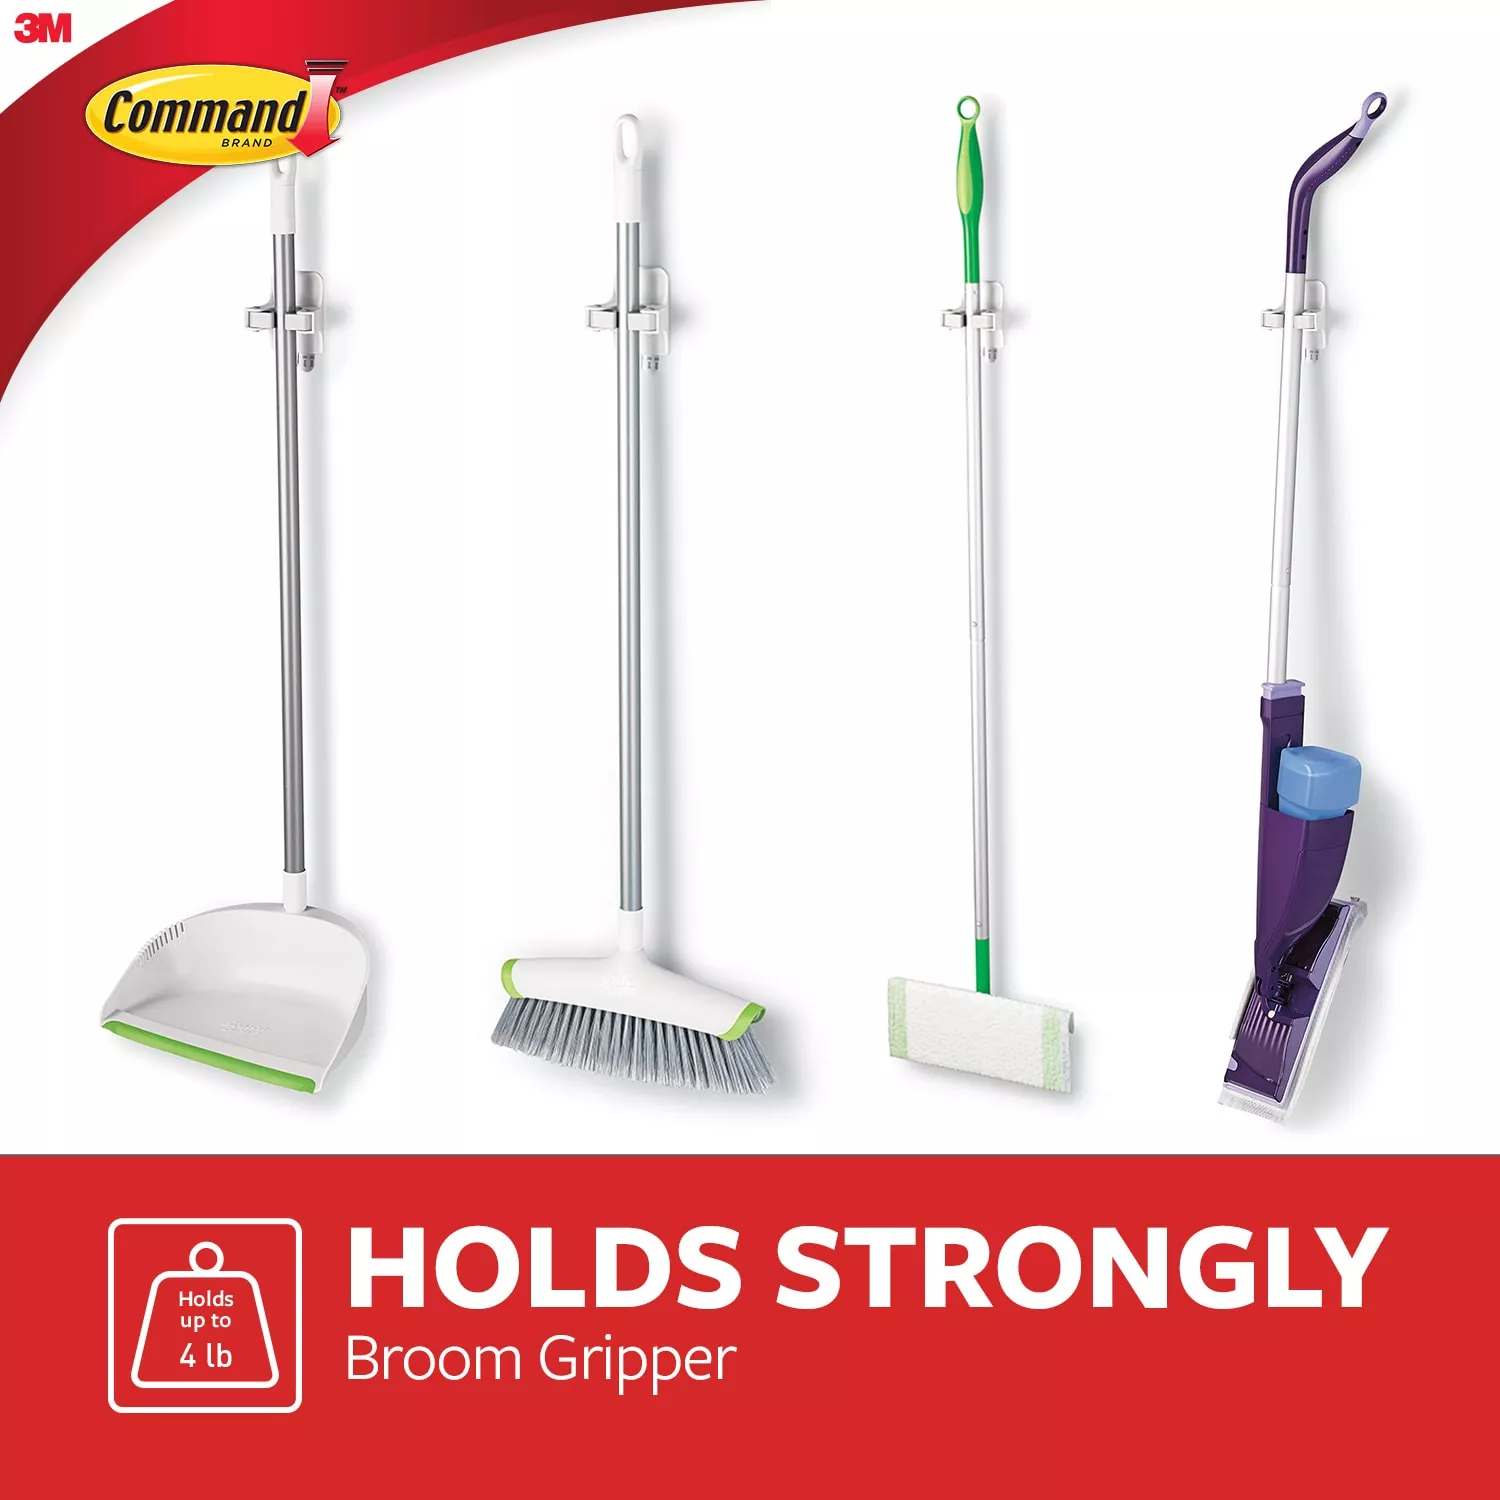 Product Number 17007 | Command™ Broom Gripper 17007-S6NA